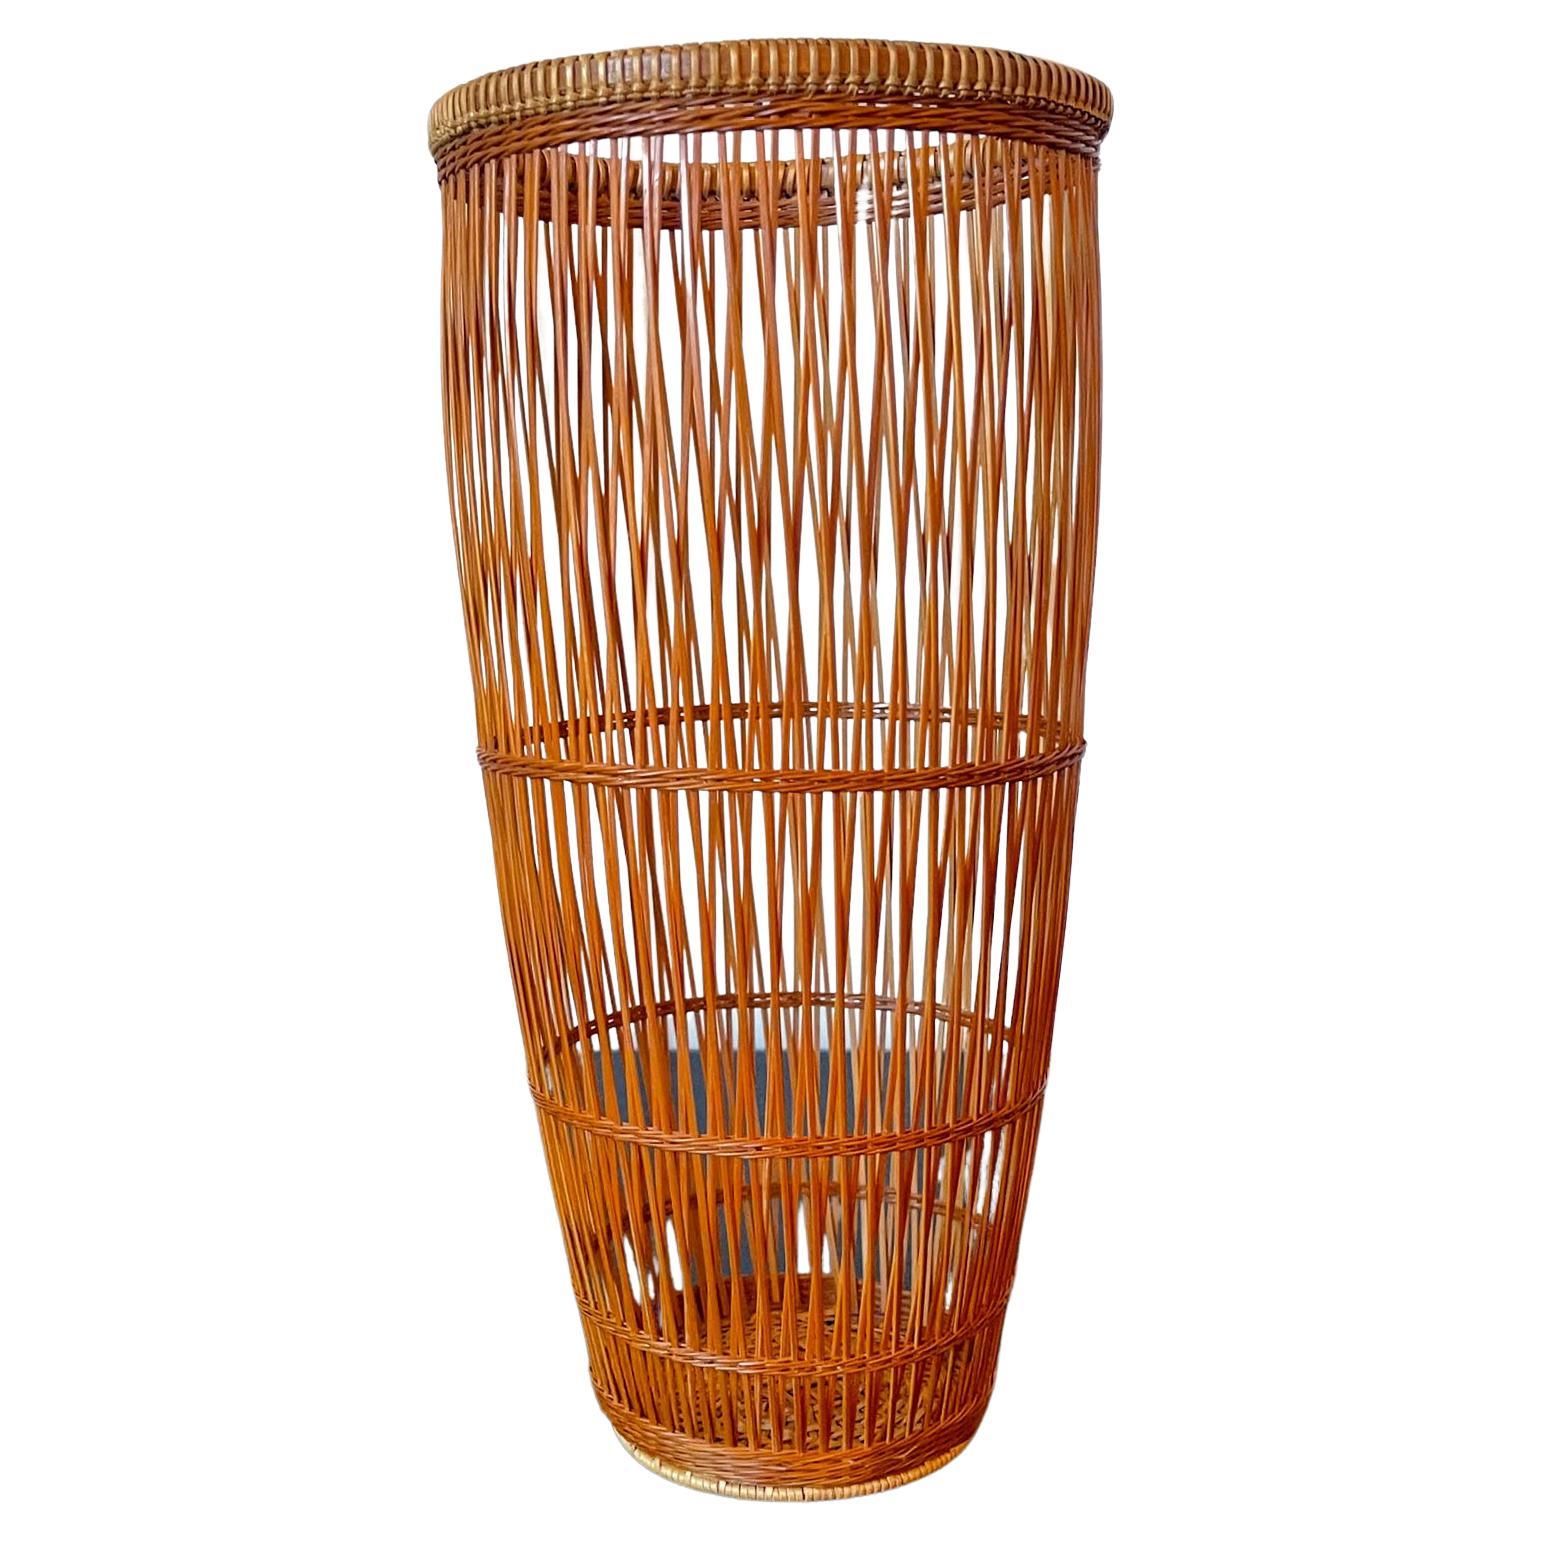 Japanese Contemporary Bamboo Basket by Abe Motoshi For Sale